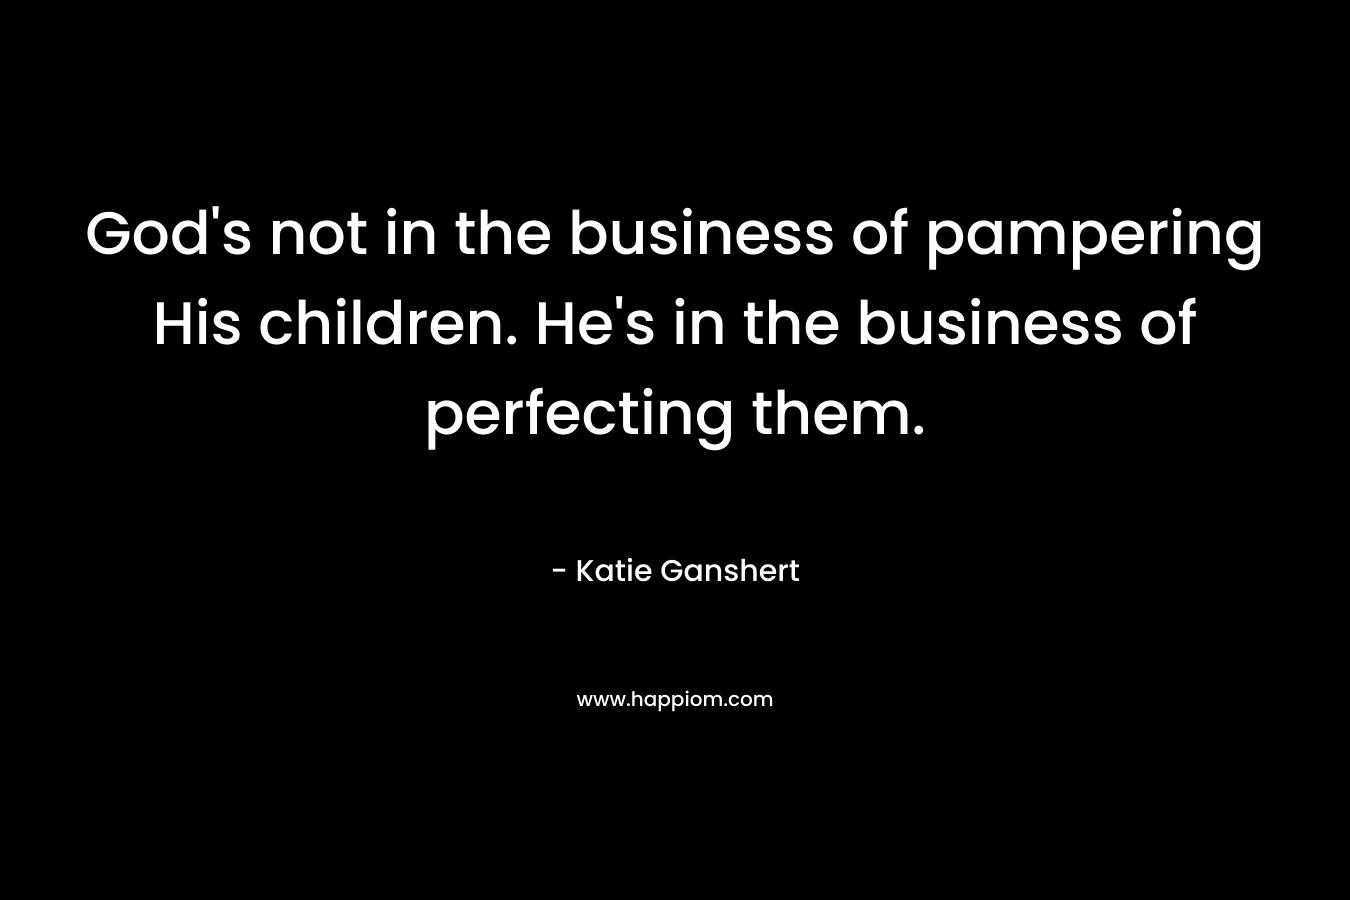 God’s not in the business of pampering His children. He’s in the business of perfecting them. – Katie Ganshert